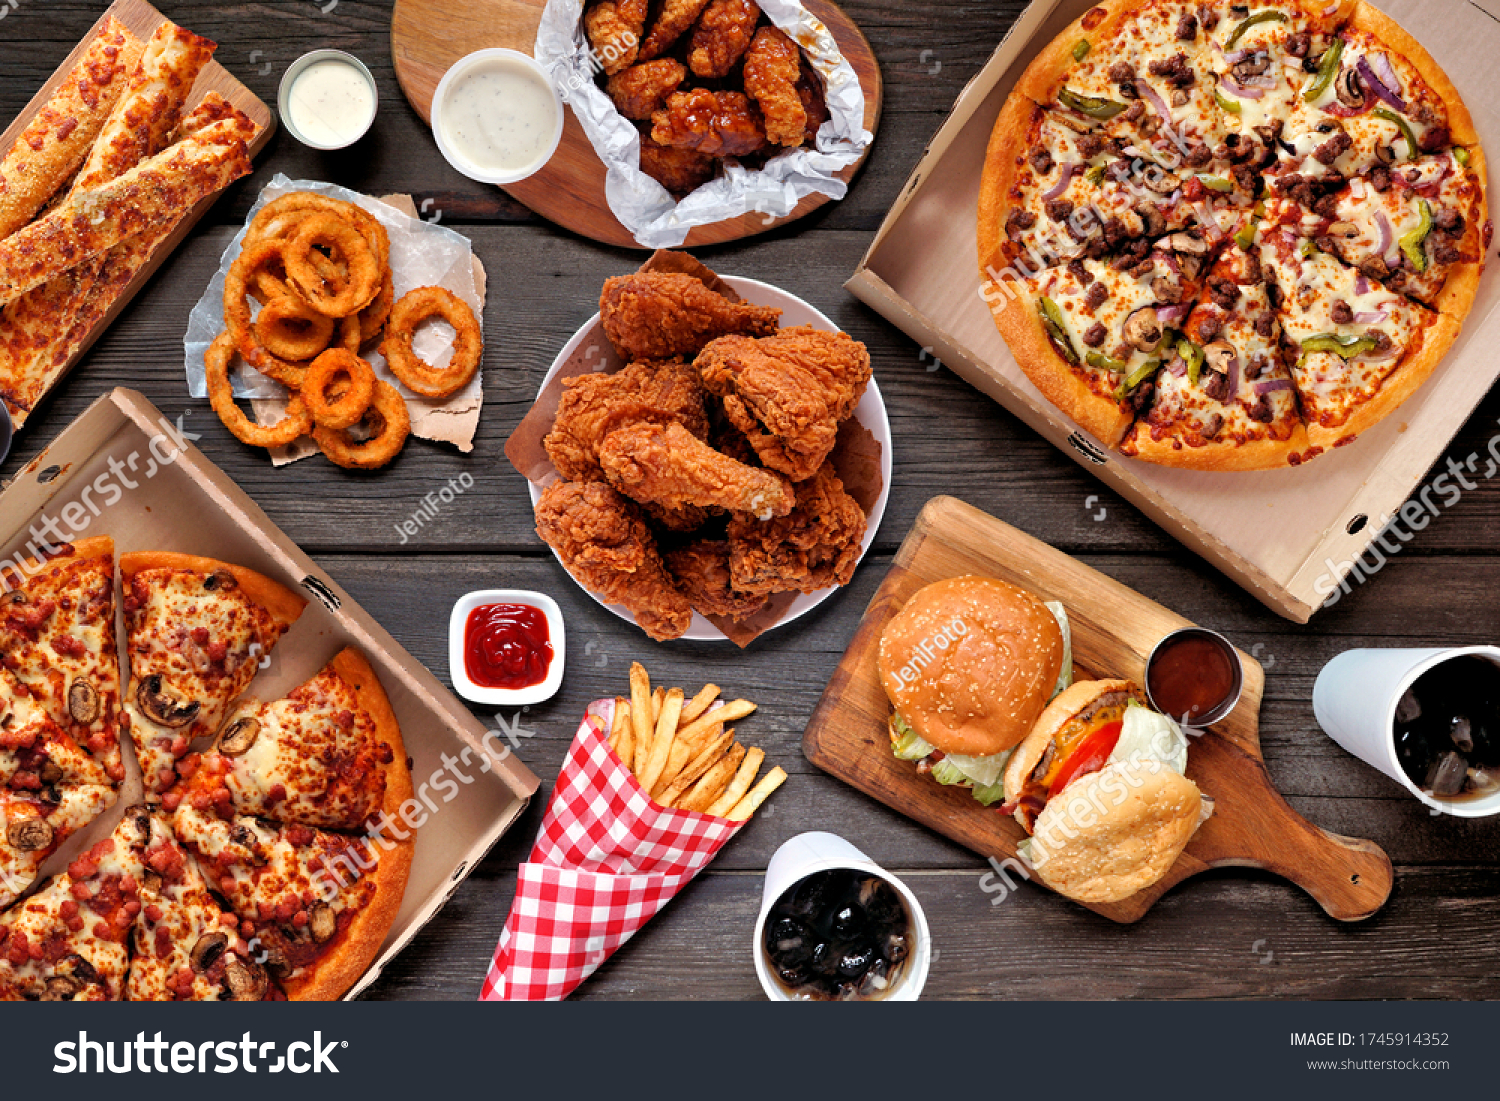 Buffet table scene of take out or delivery foods. Pizza, hamburgers, fried chicken and sides. Above view on a dark wood background. #1745914352